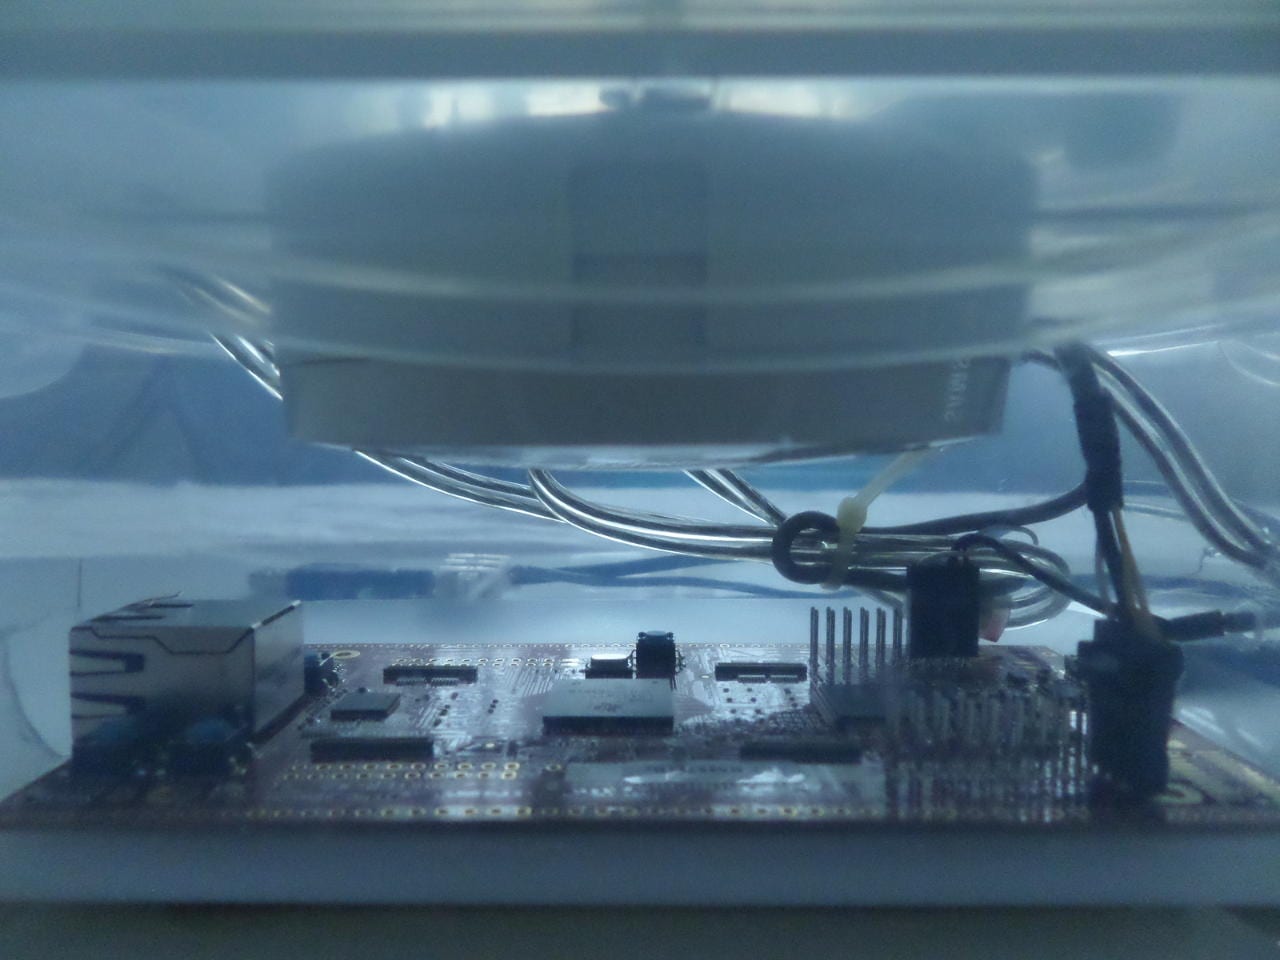 Side view of the PWM fan controller.